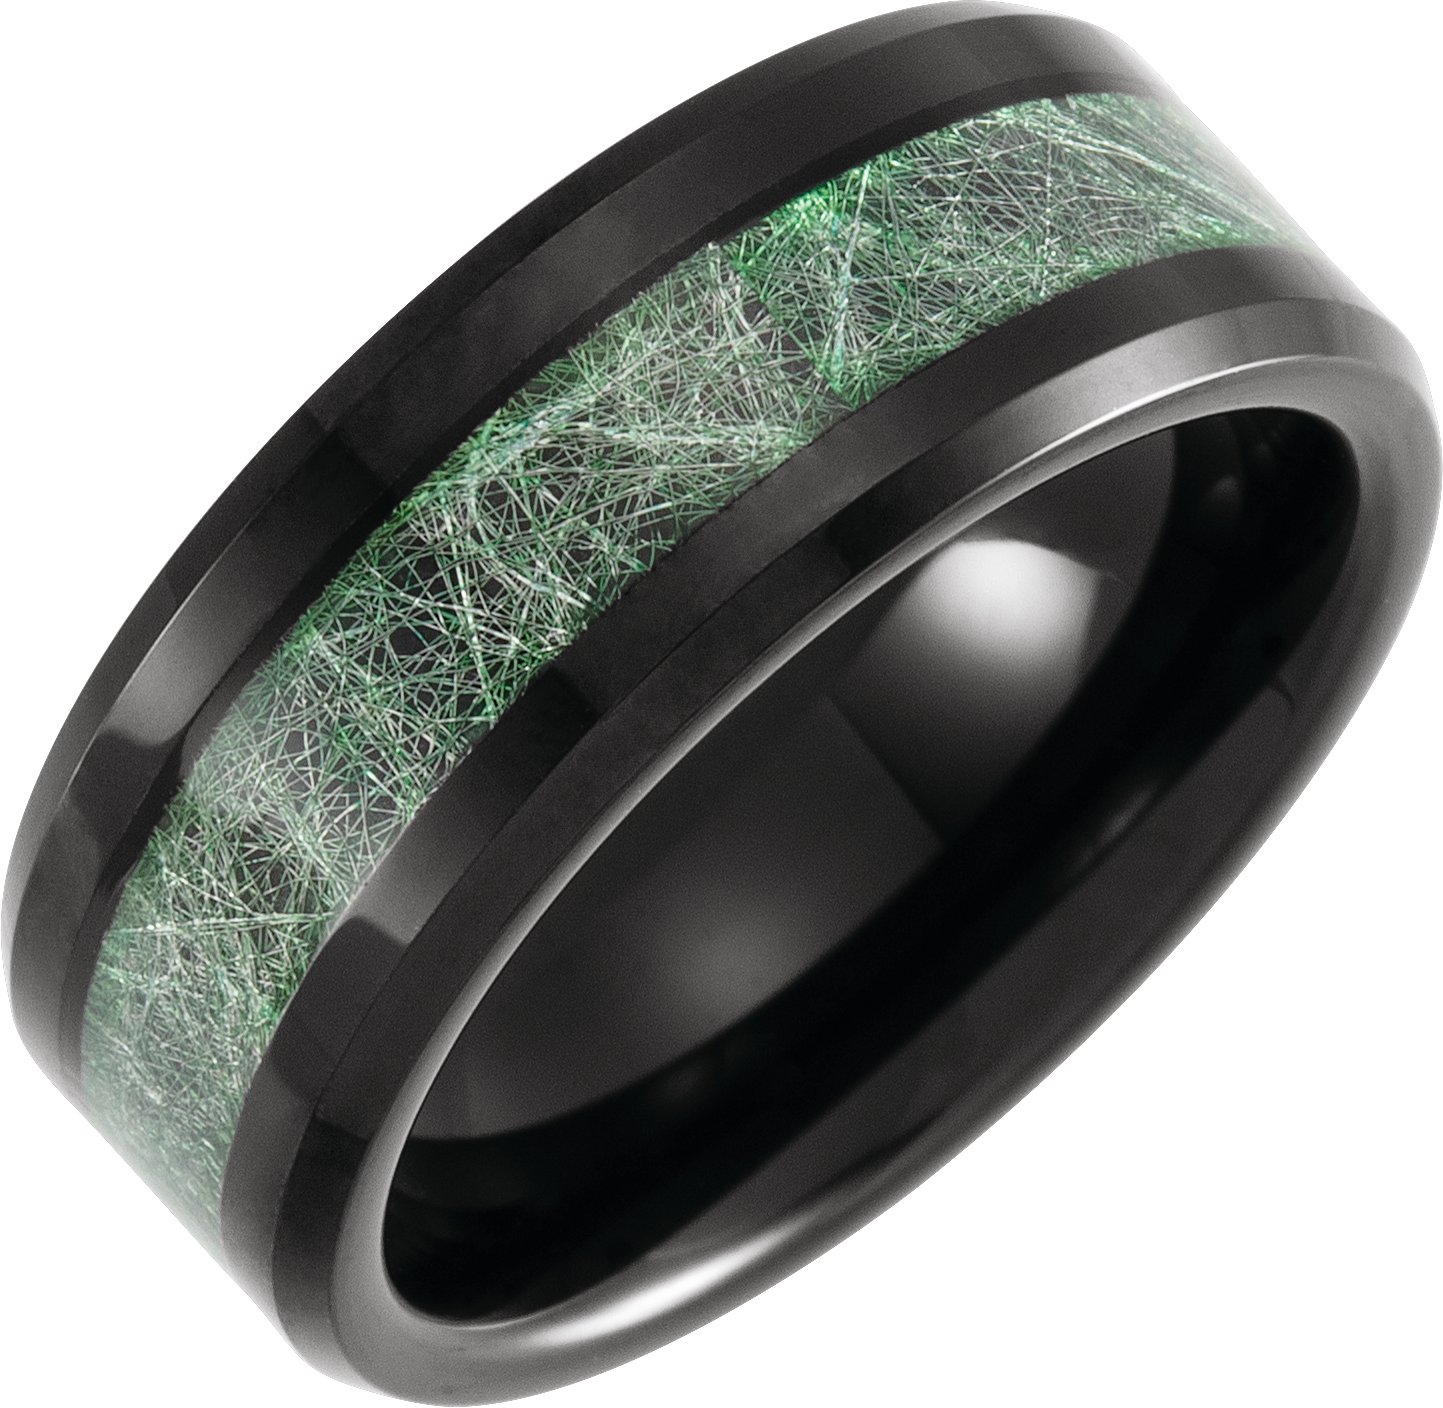 Tungsten 8 mm Beveled Band with Imitation Meteorite Inlay Size 10.5